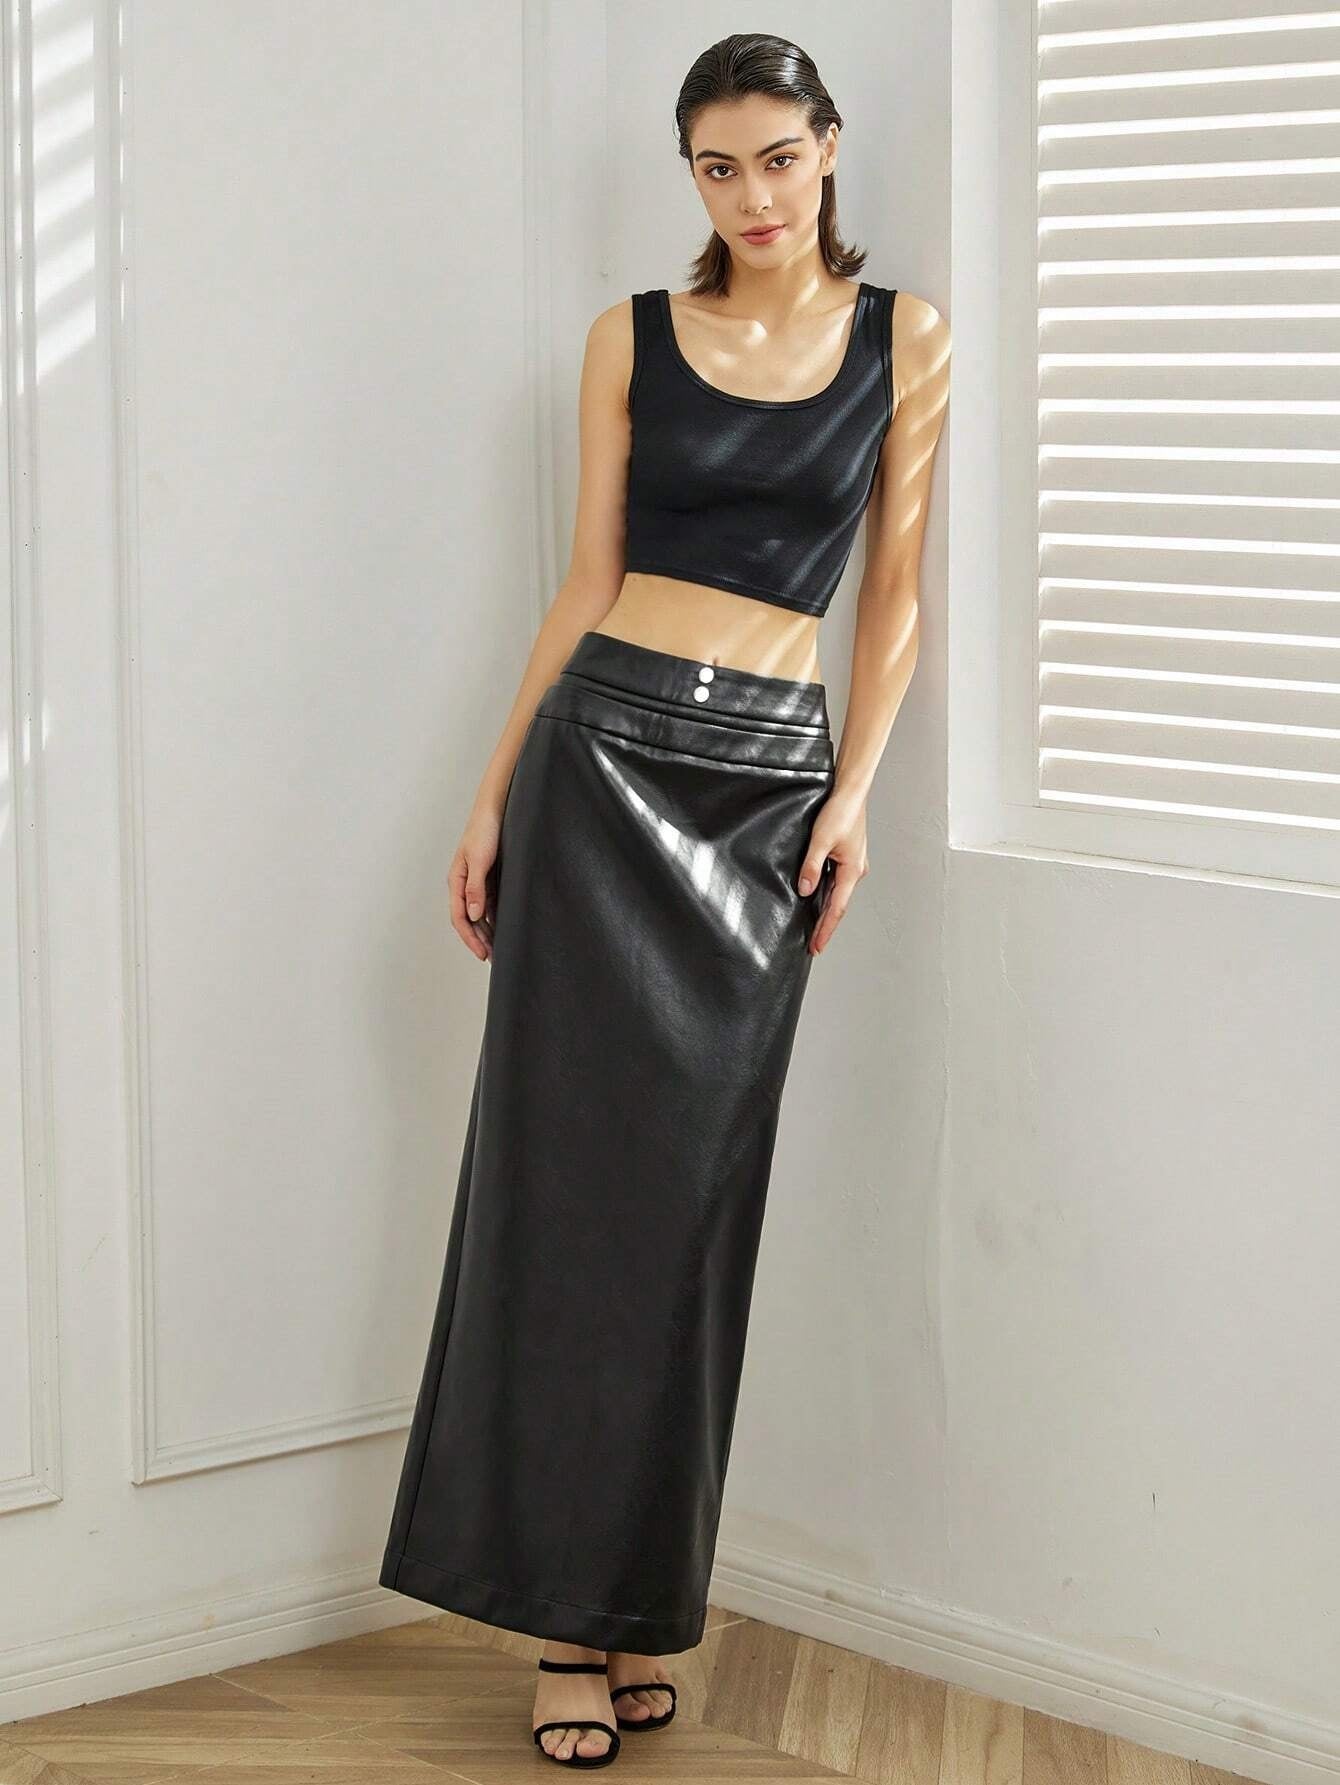 CM-BS351464 Women Casual Seoul Style PU Leather Straight Skirt - Black